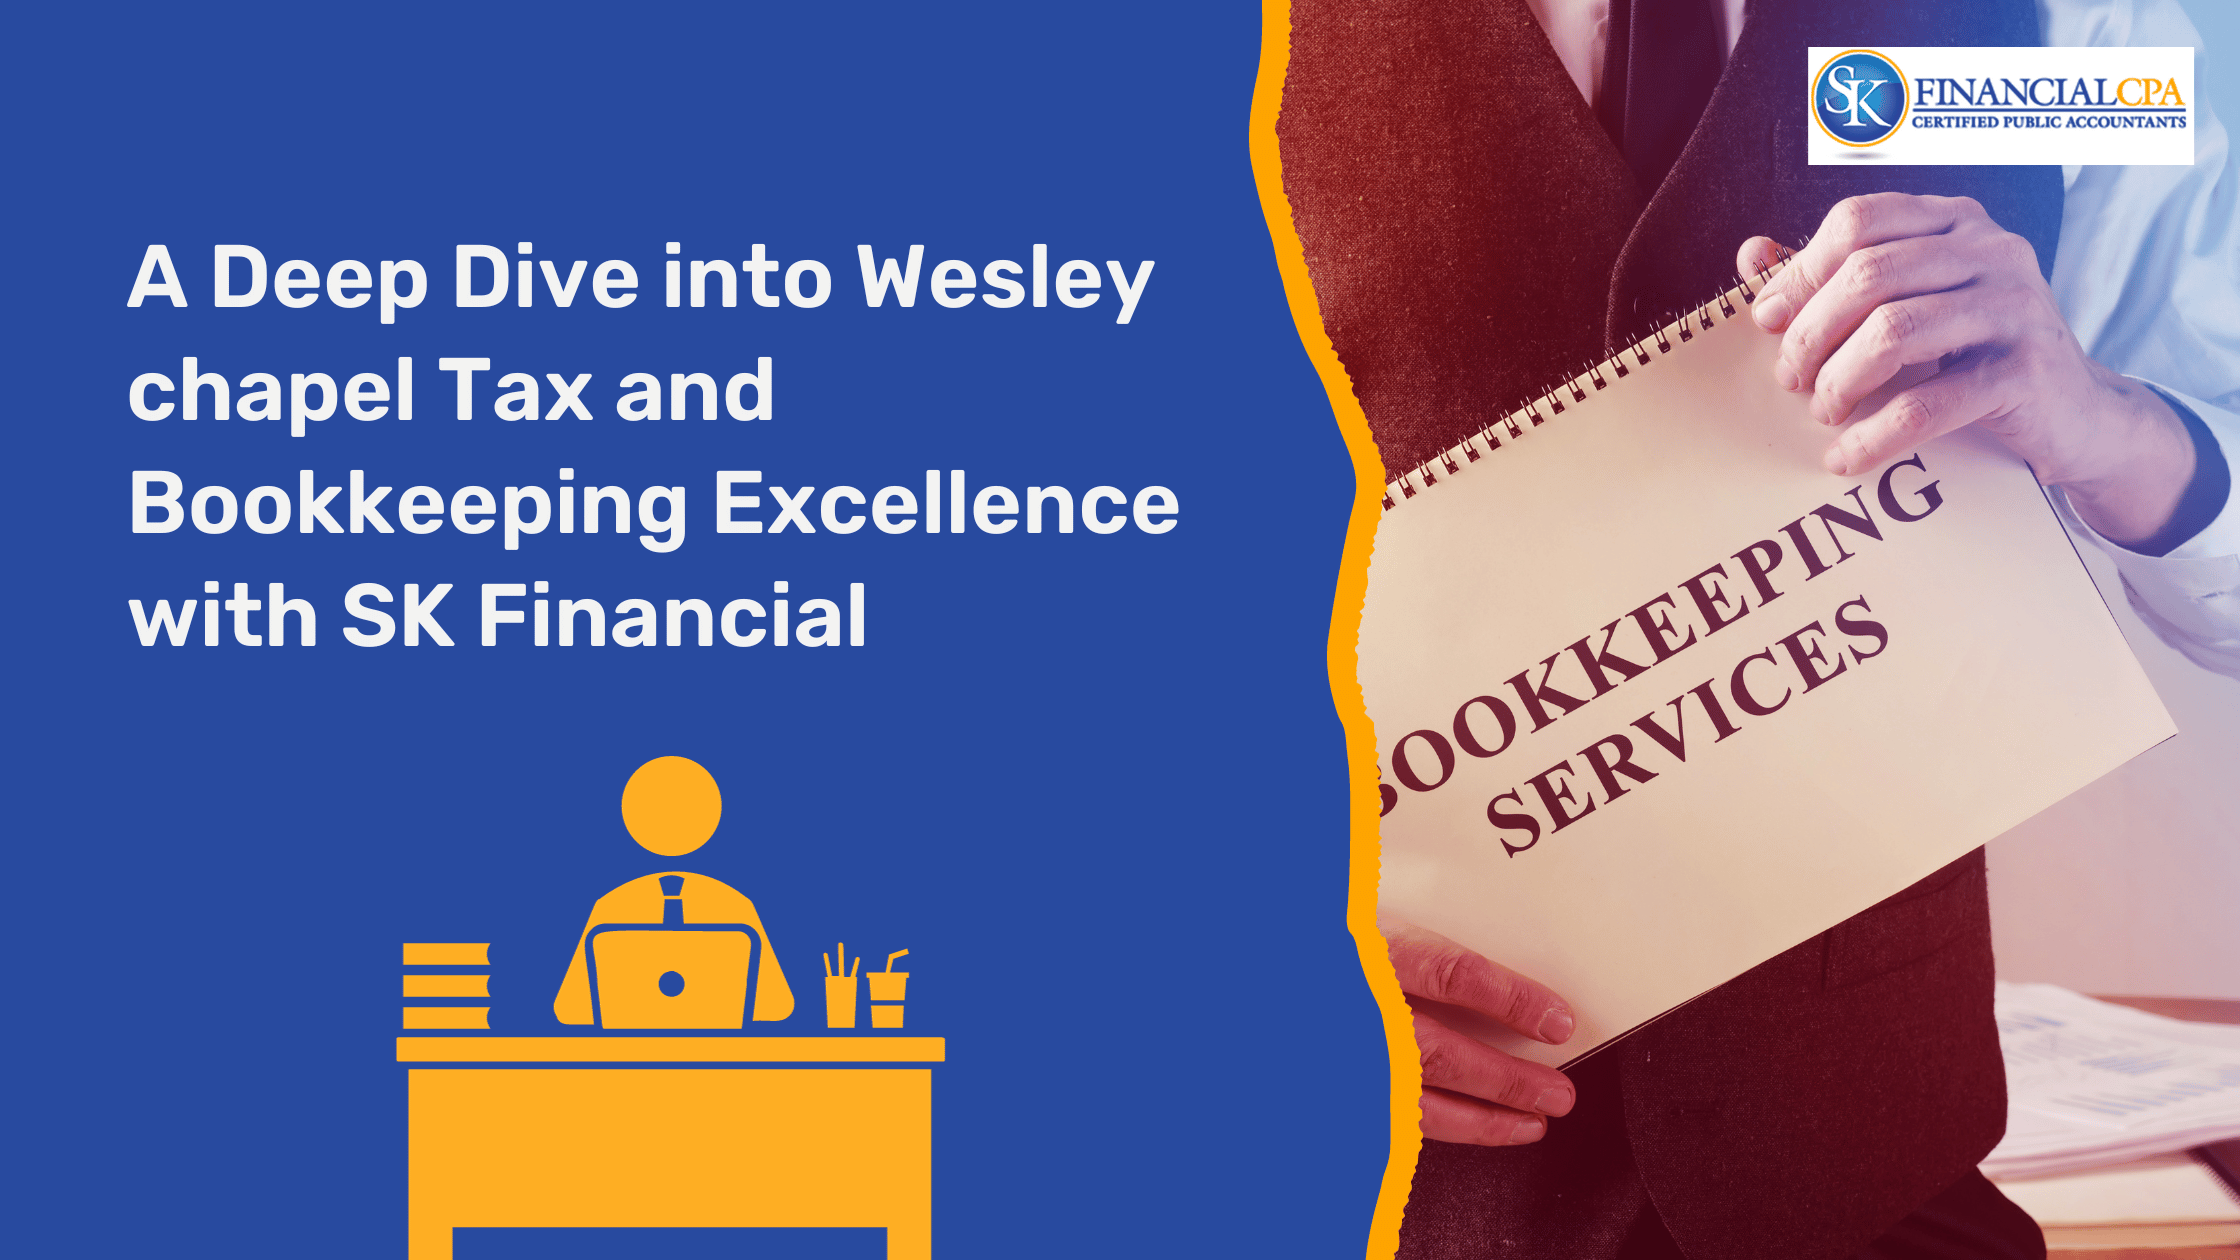 A Deep Dive into Wesley chapel Tax and Bookkeeping Excellence with SK Financial